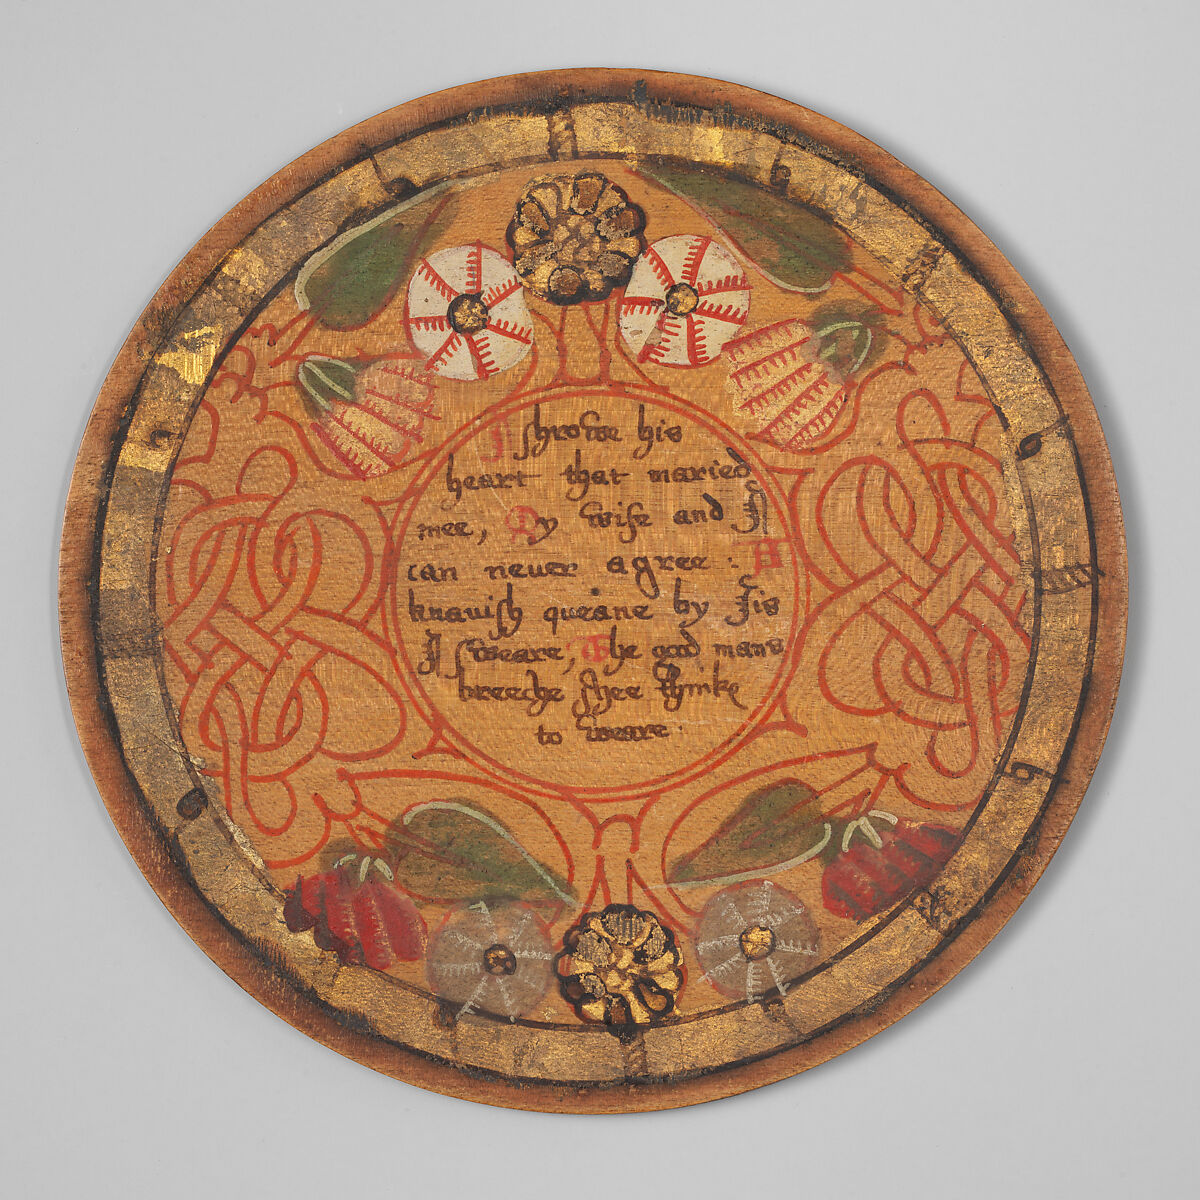 Trencher (one of a set), Oak and sycamore woods, painted, silvered and yellow varnished; inscription: ink (animal or vegetable)